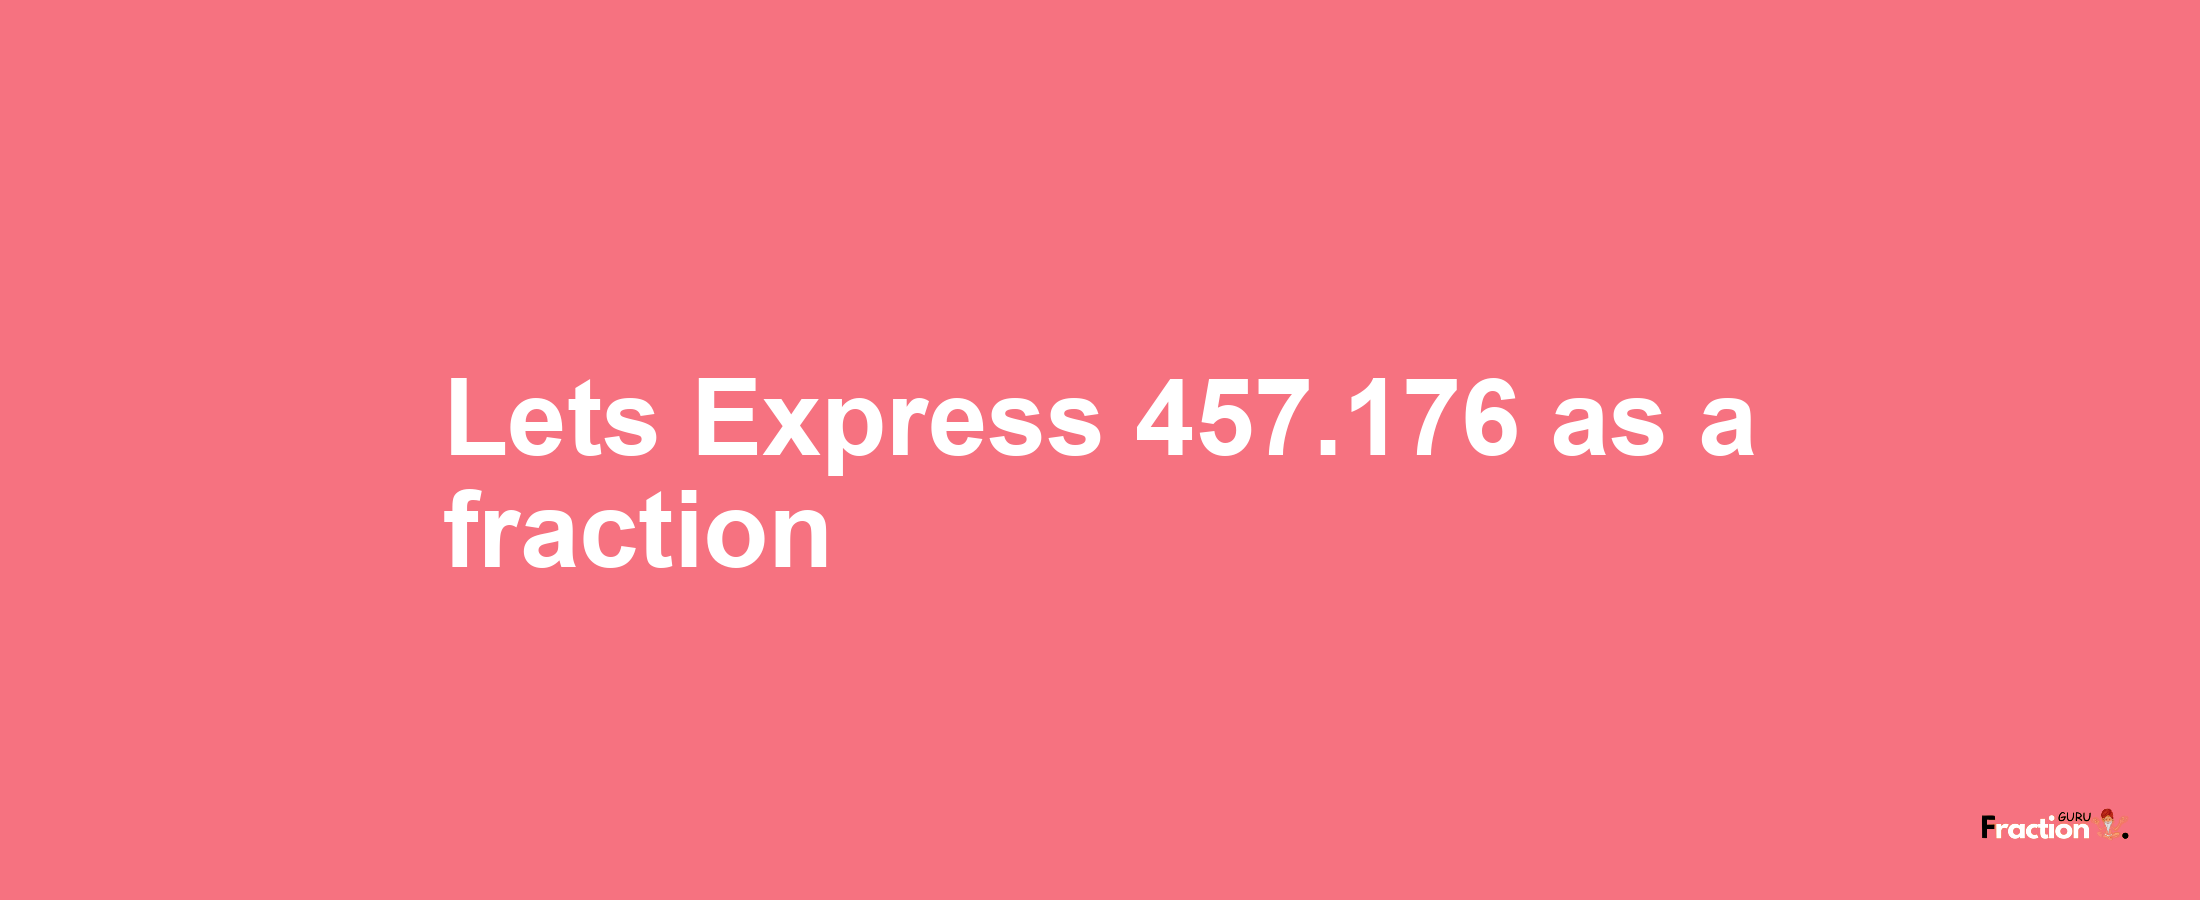 Lets Express 457.176 as afraction